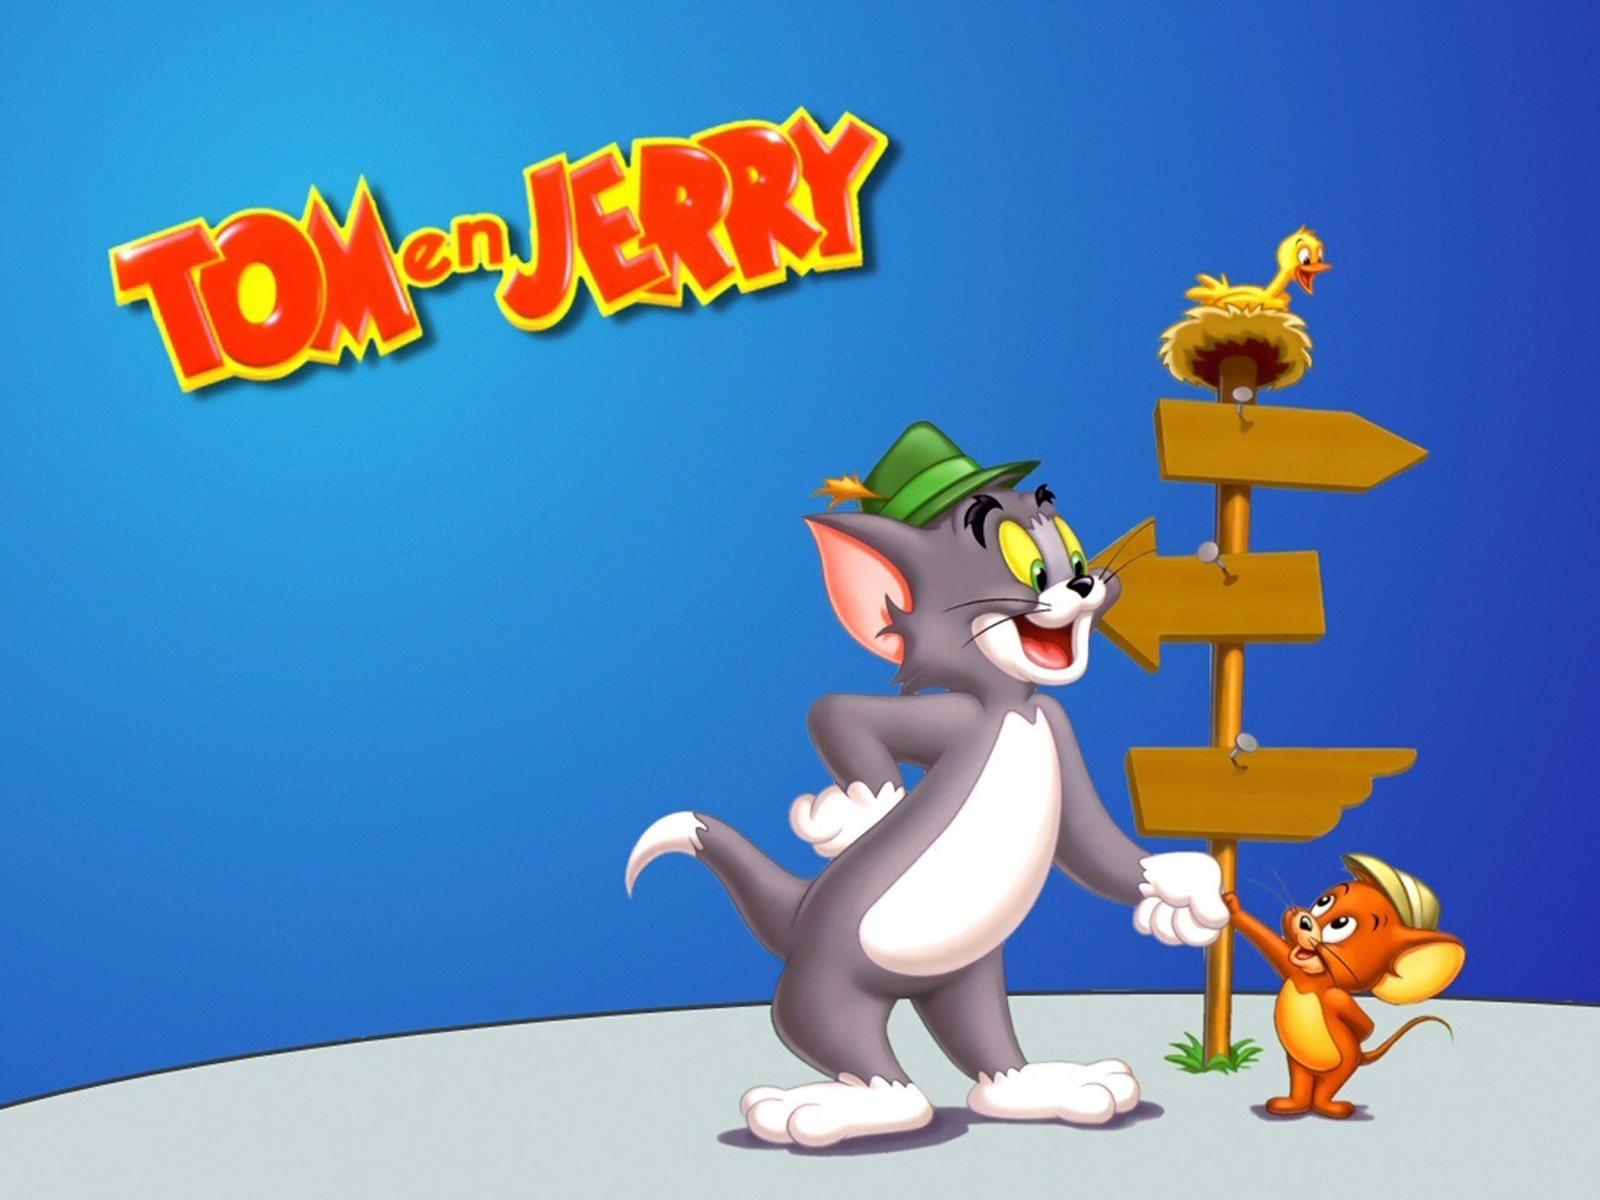 Tom and jerry are friends - Cartoon wallpaper